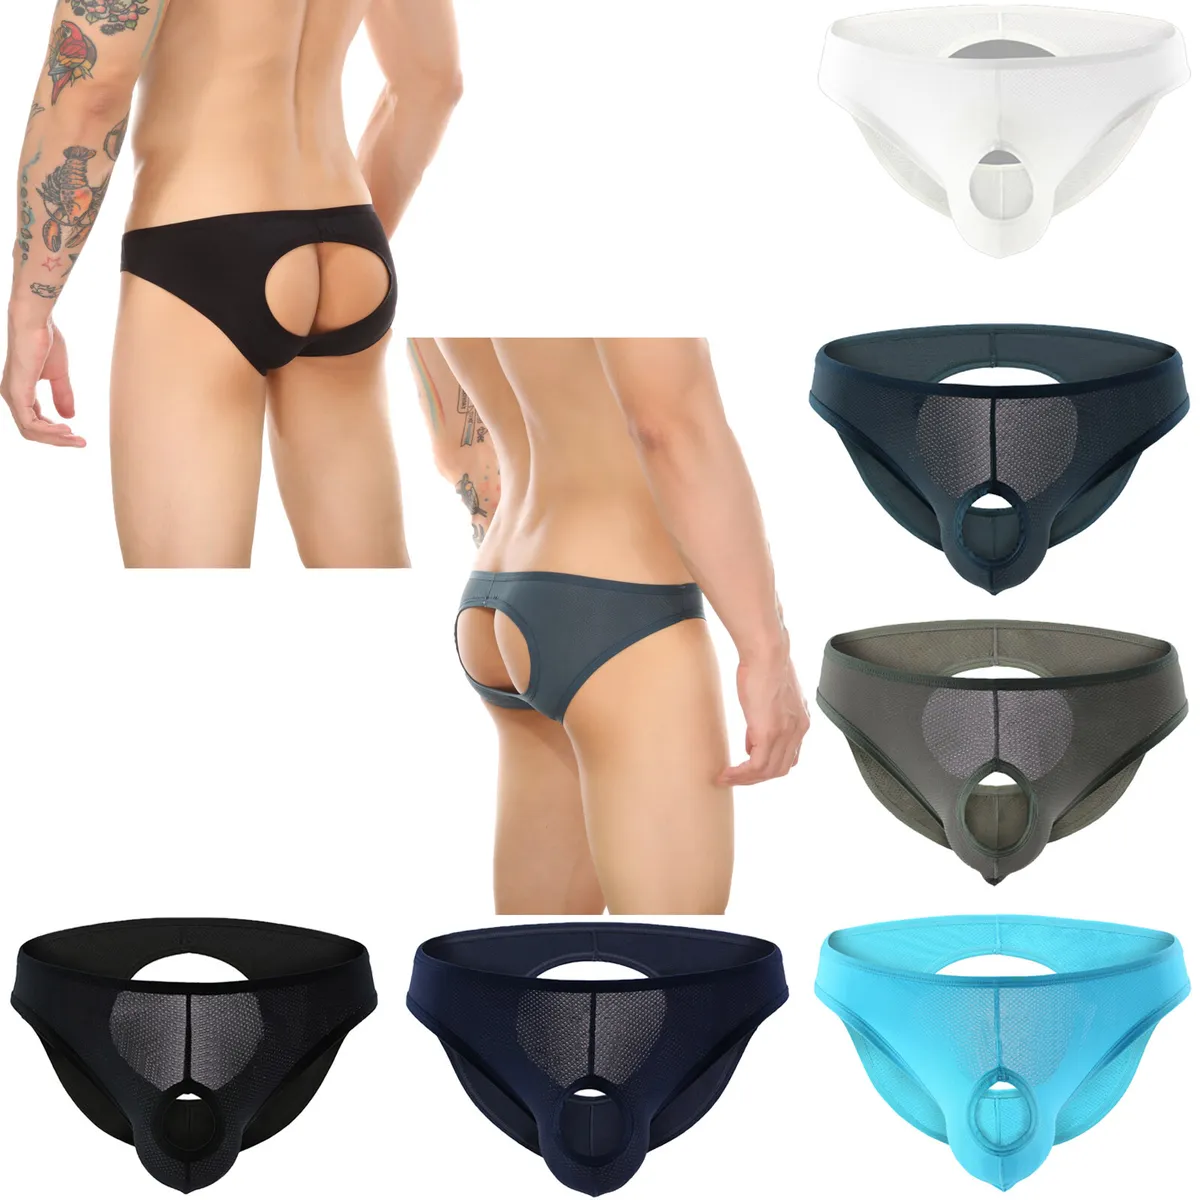 candy mcvay recommends mens crotchless briefs pic